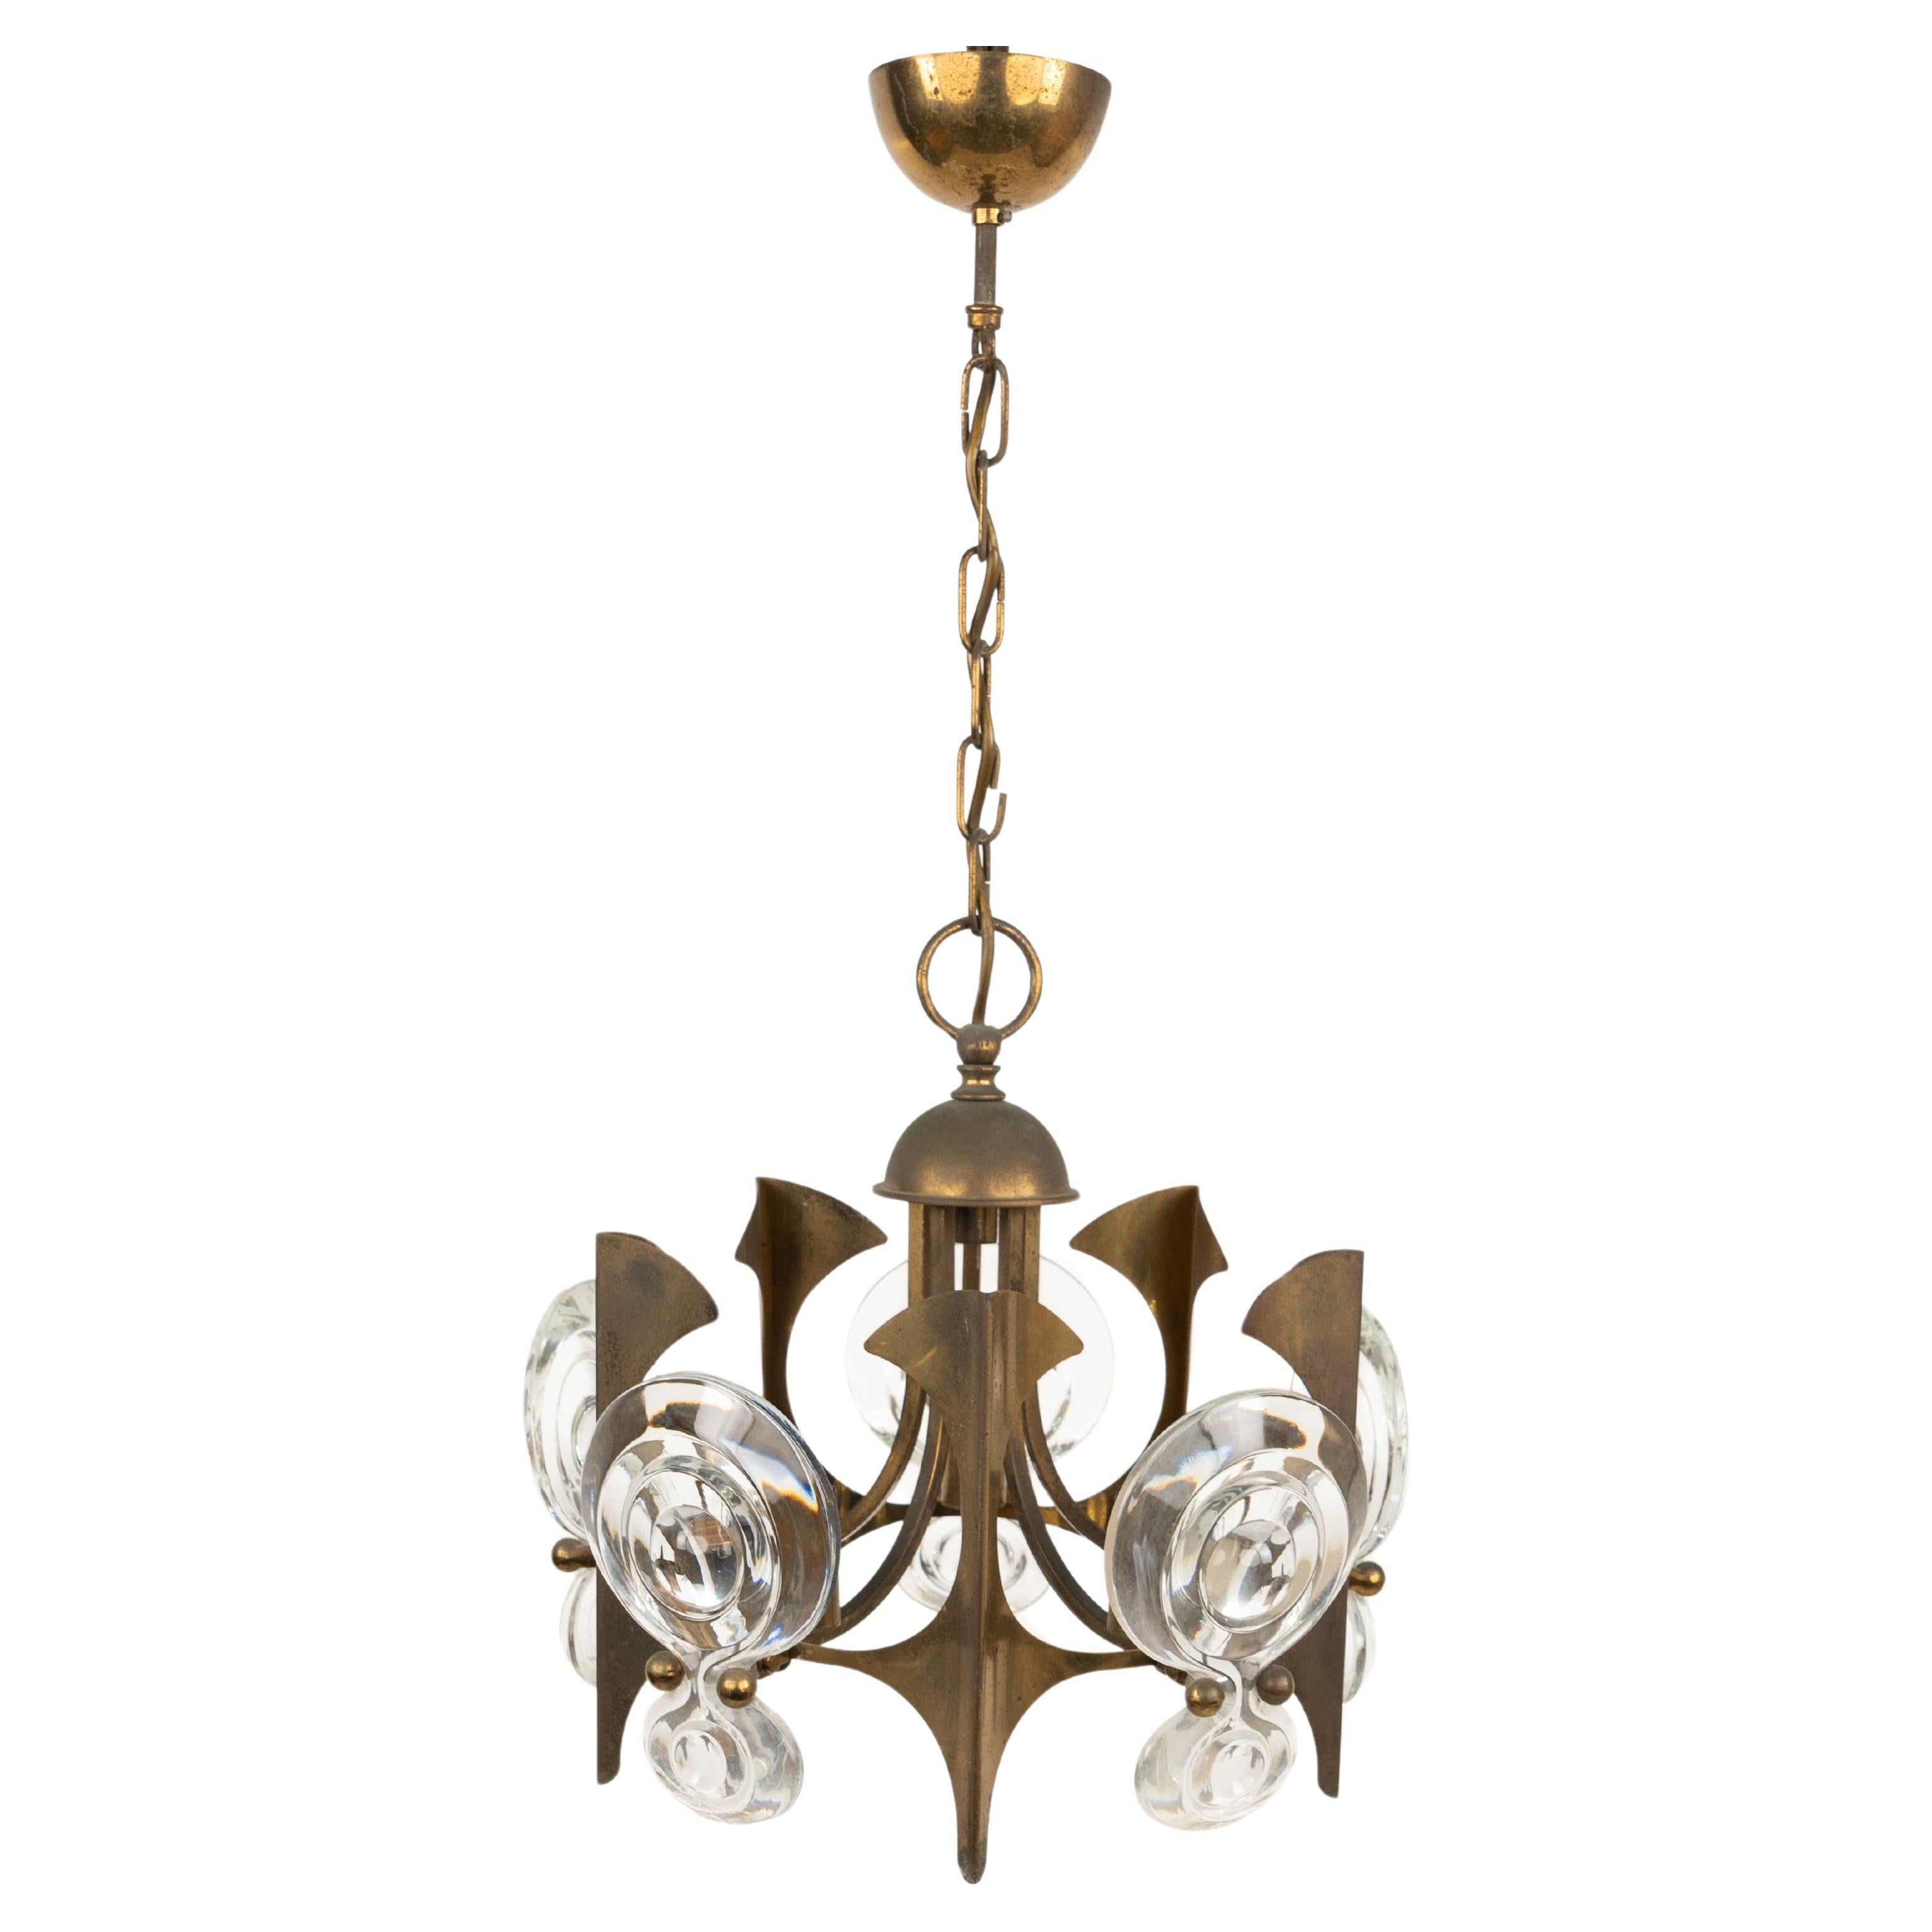 Midcentury Chandelier Brass and Glass by Oscar Torlasco, Italy 1960s